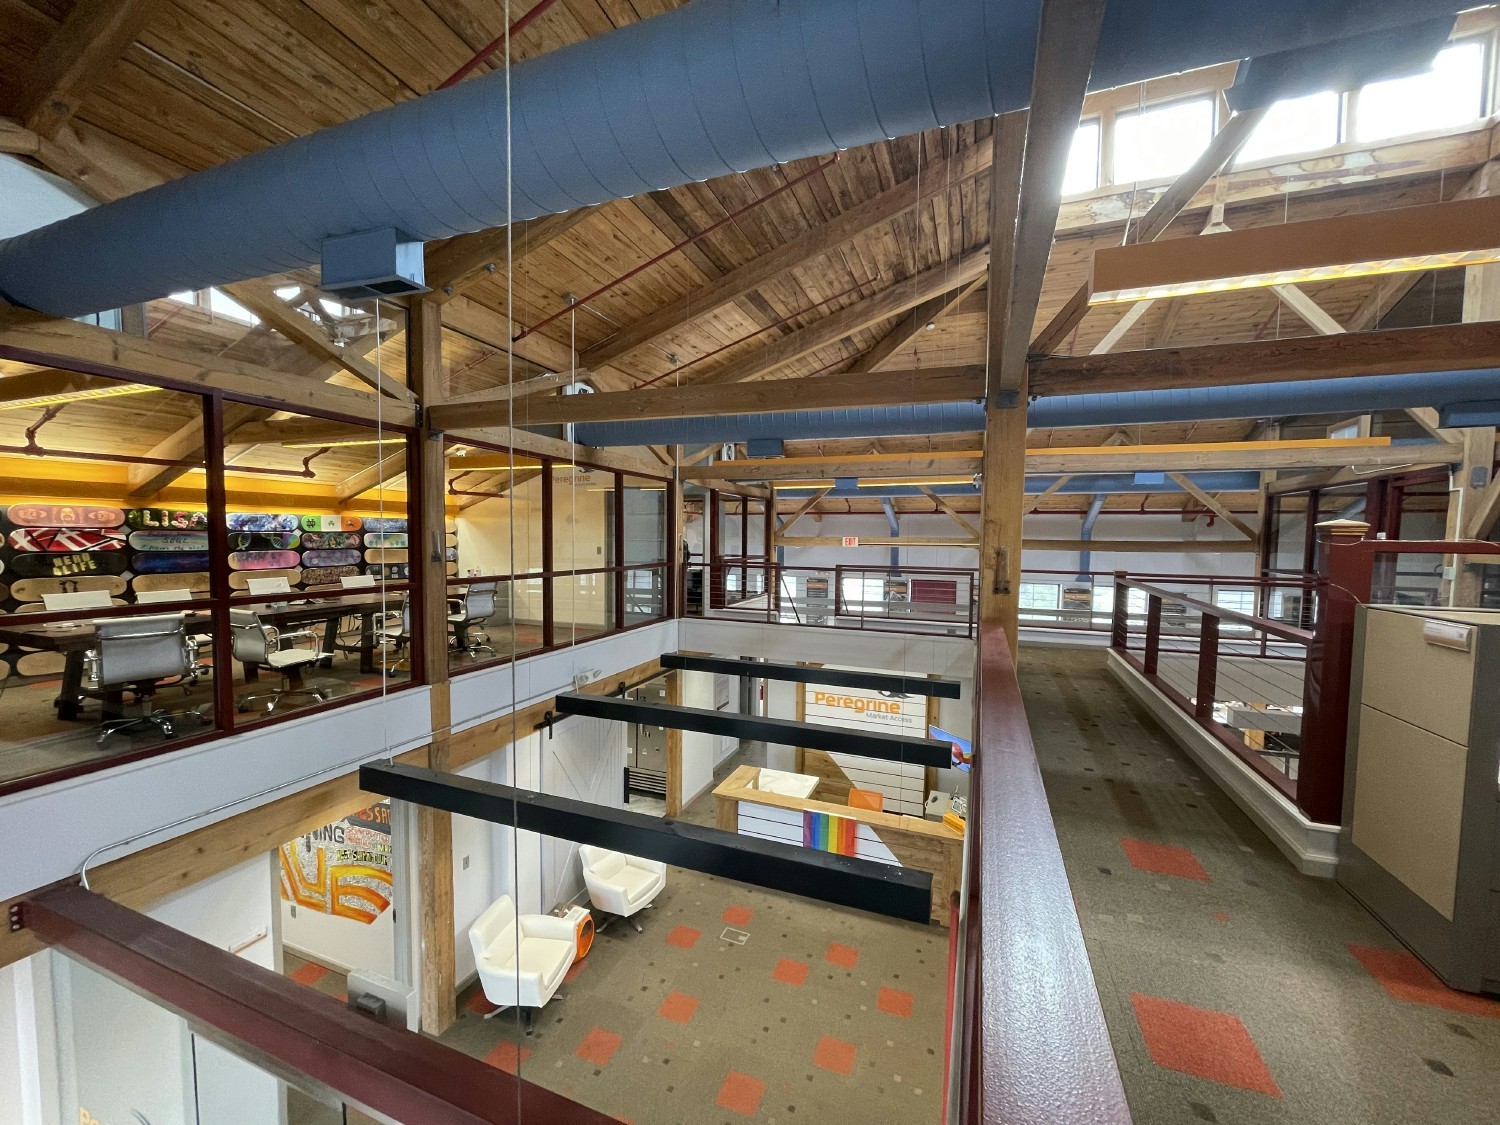 Our Saratoga Springs office is located in the historic Van Raalte Knitting Mill, and adapted into a modern office space